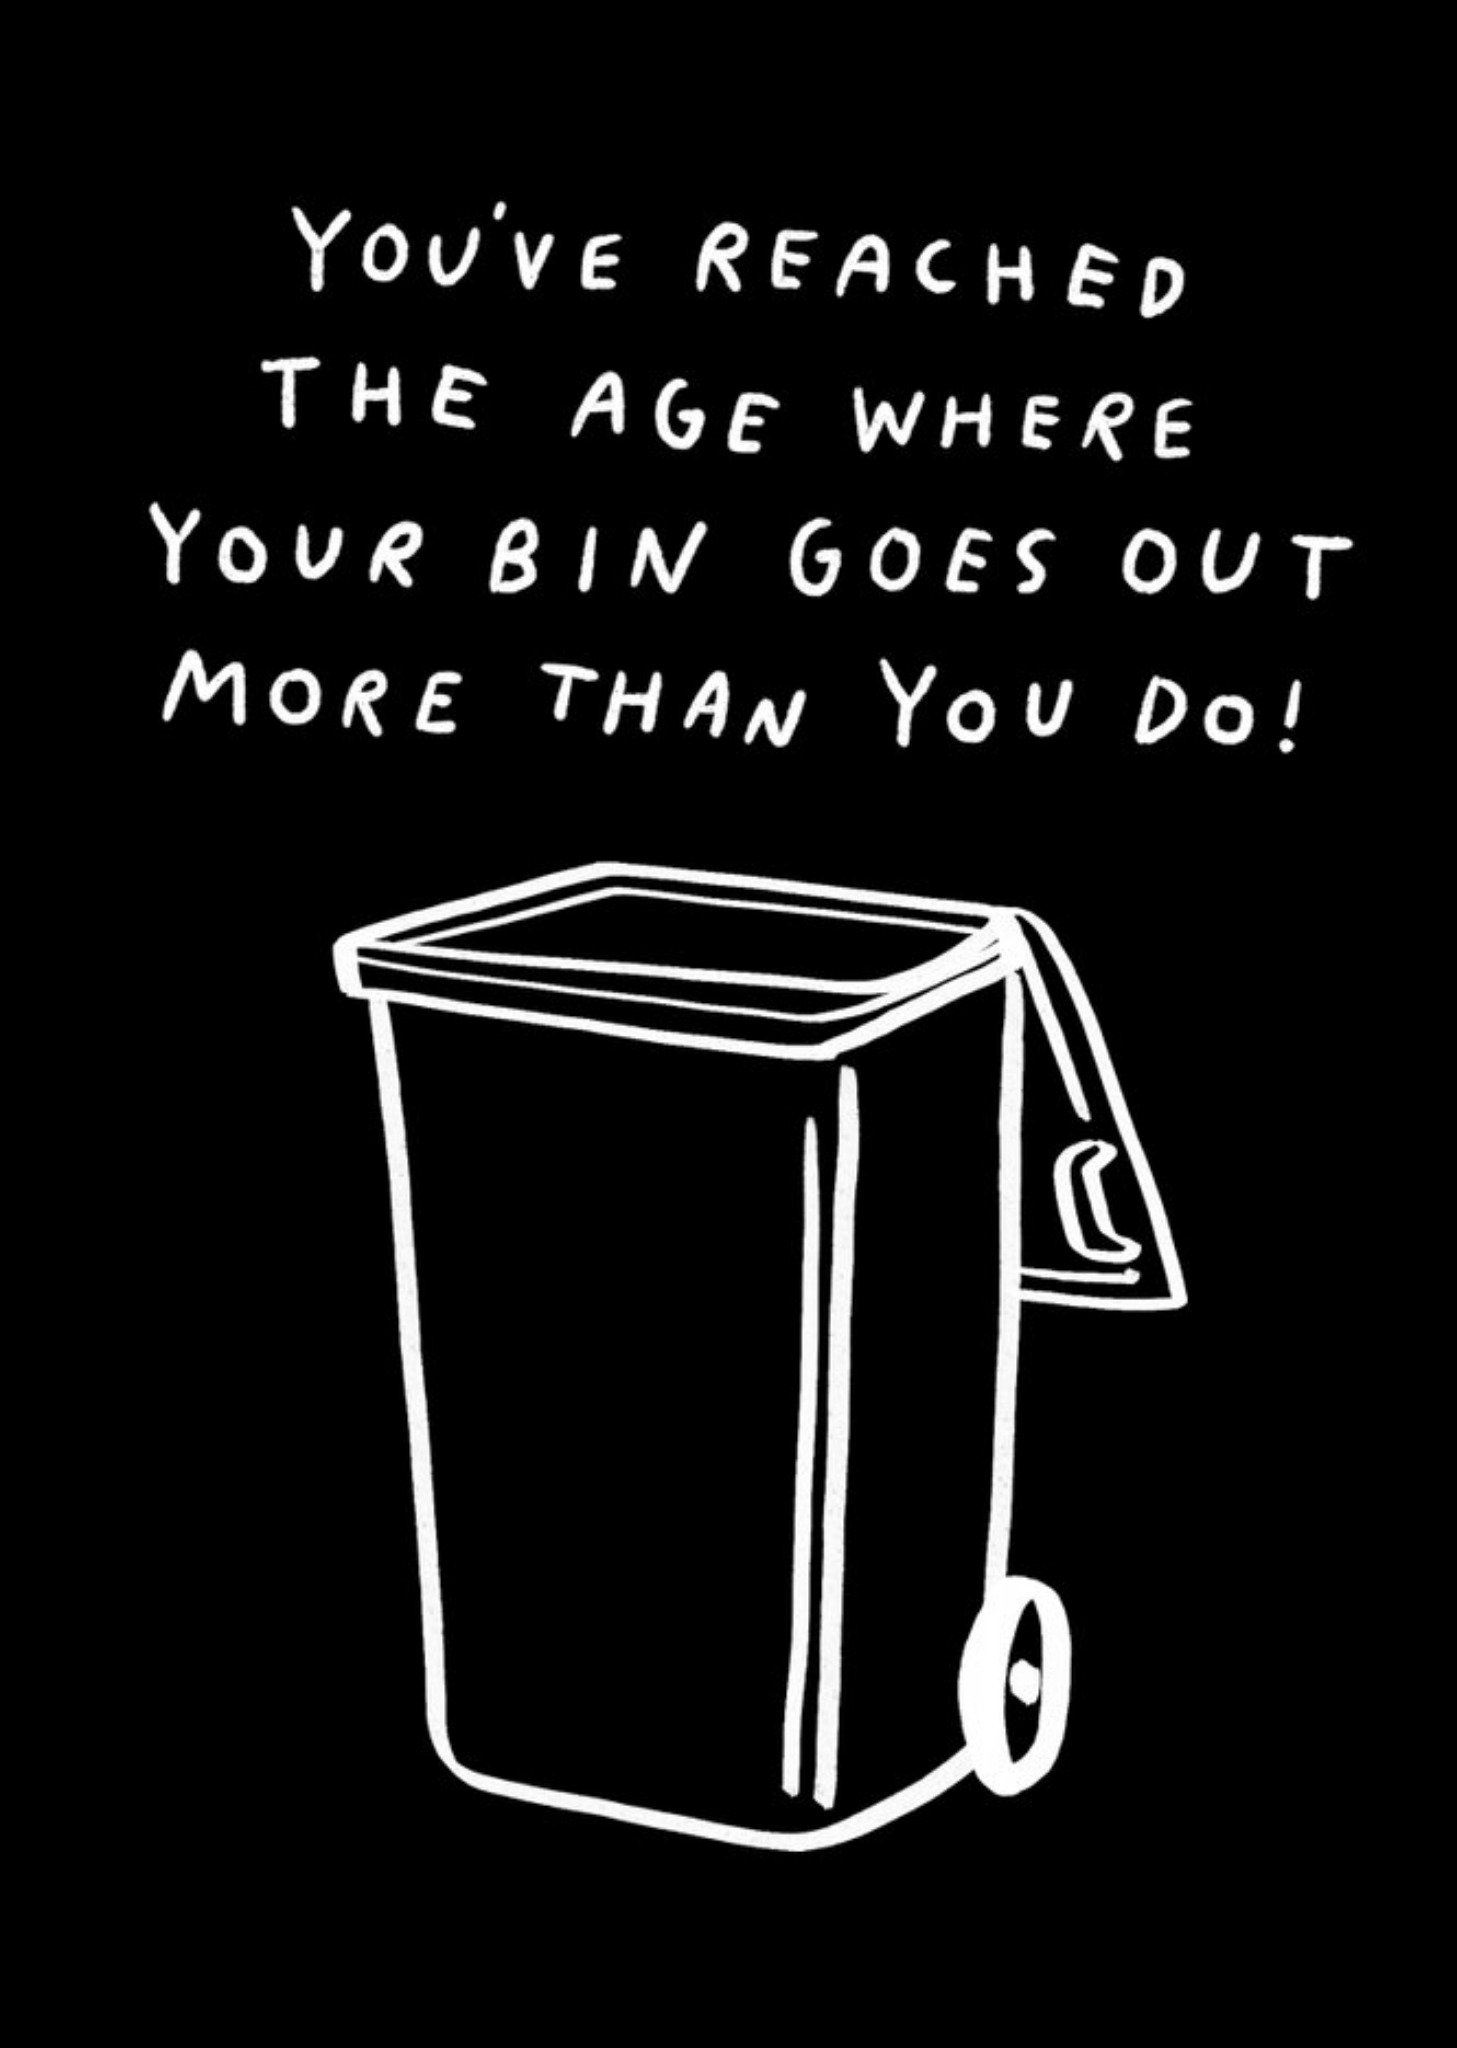 Moonpig Pigment Put The Bins Out Bins Go Out More Than You Do Funny Birthday Card Ecard